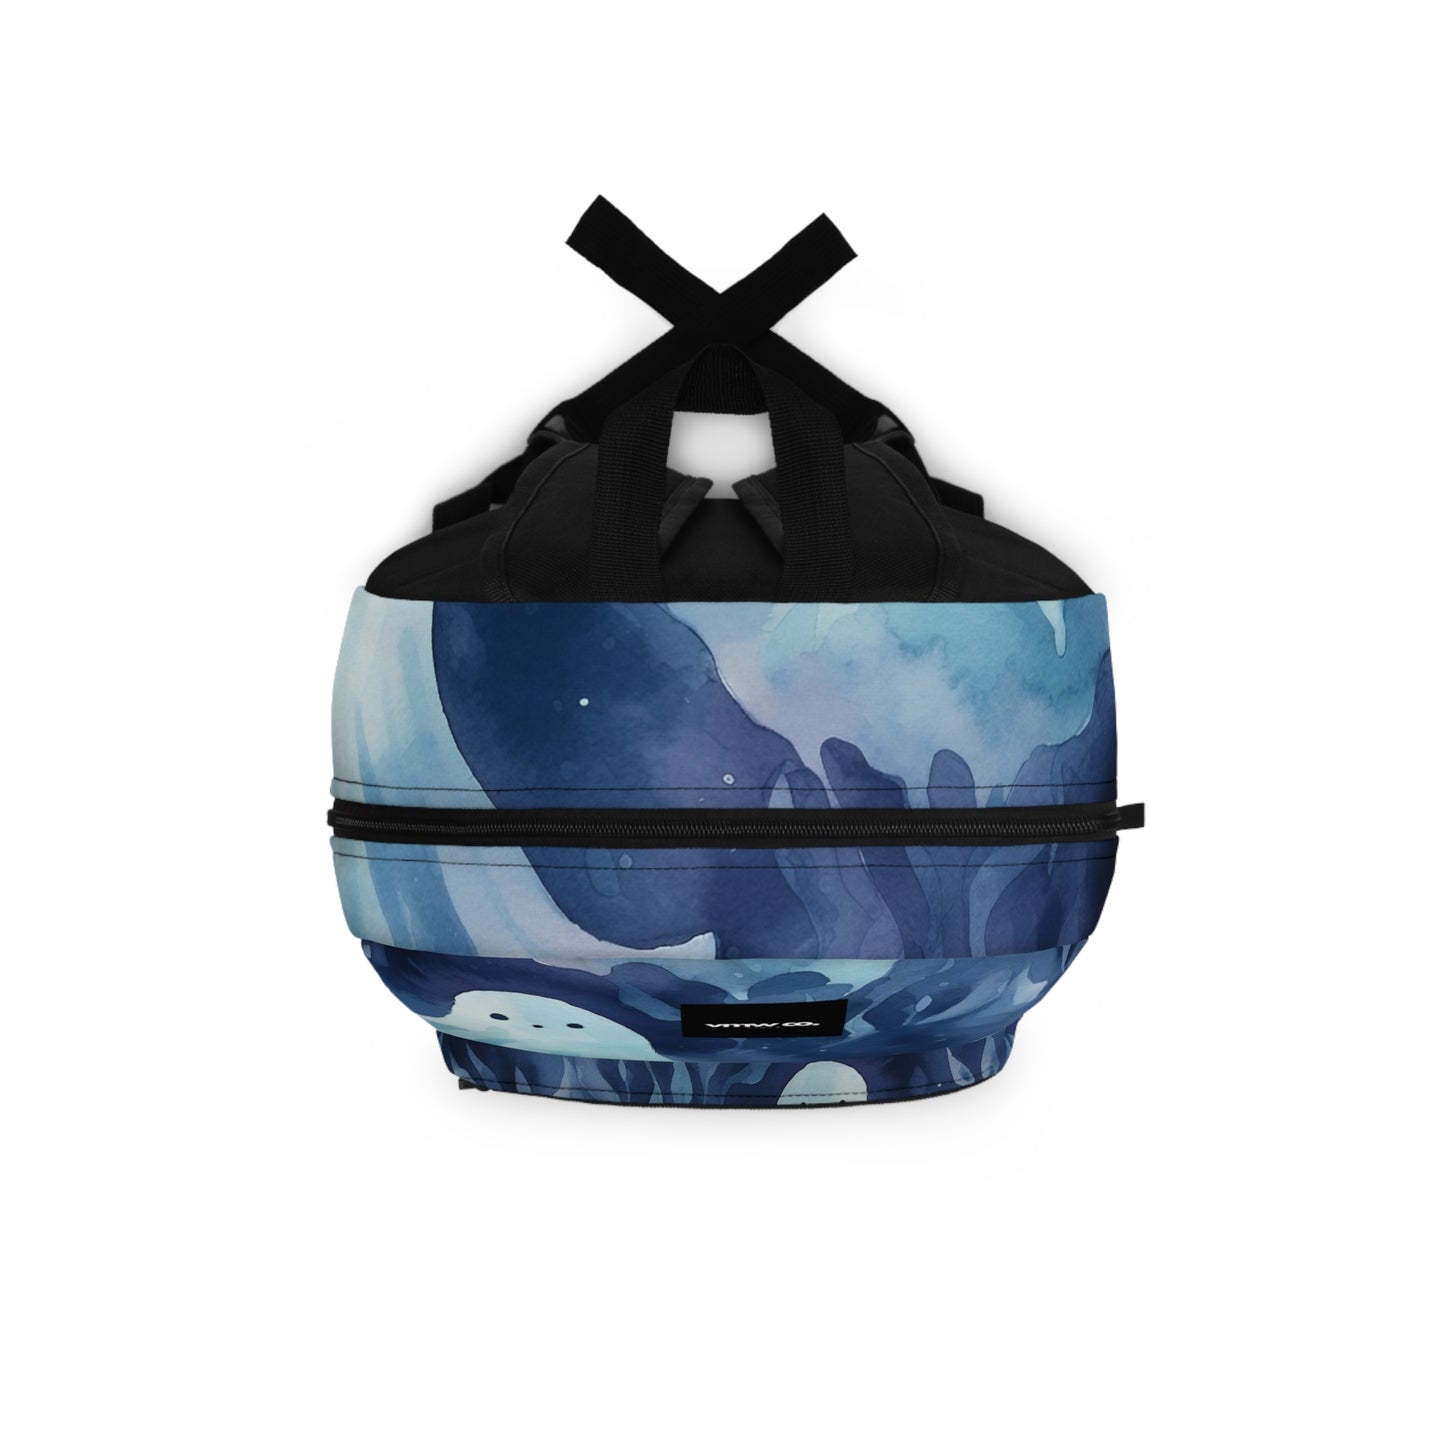 Ghosts Blue Backpack